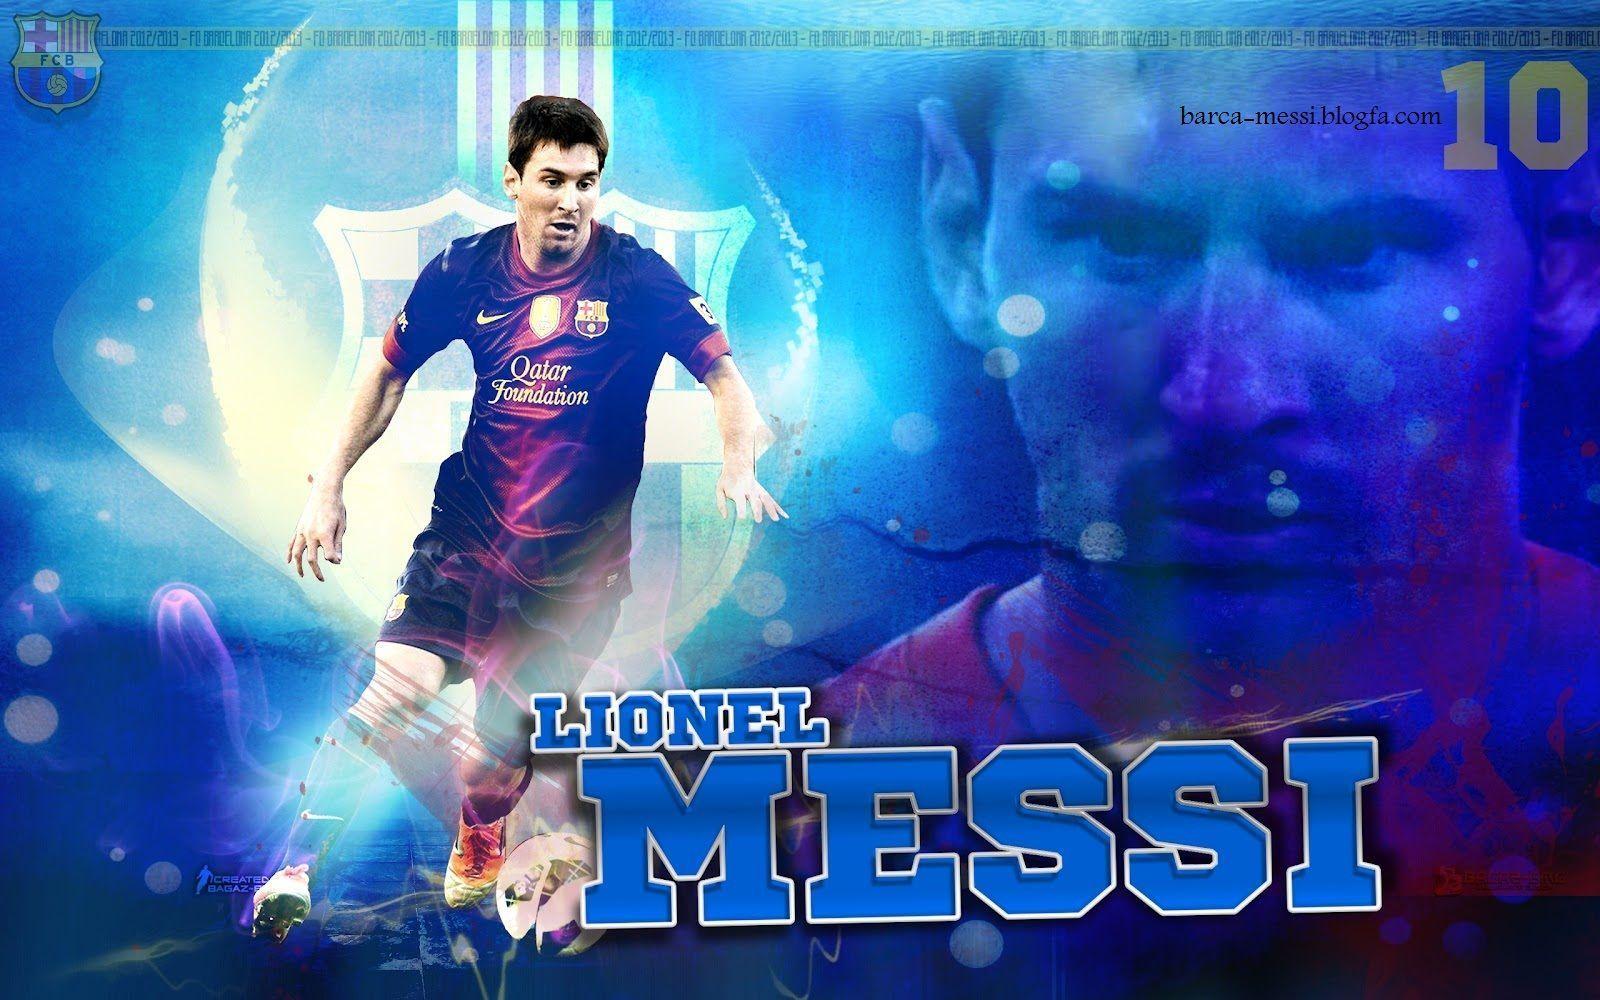 messi wallpaper 2014 HD. Funny picture photo, funny jokes, funny